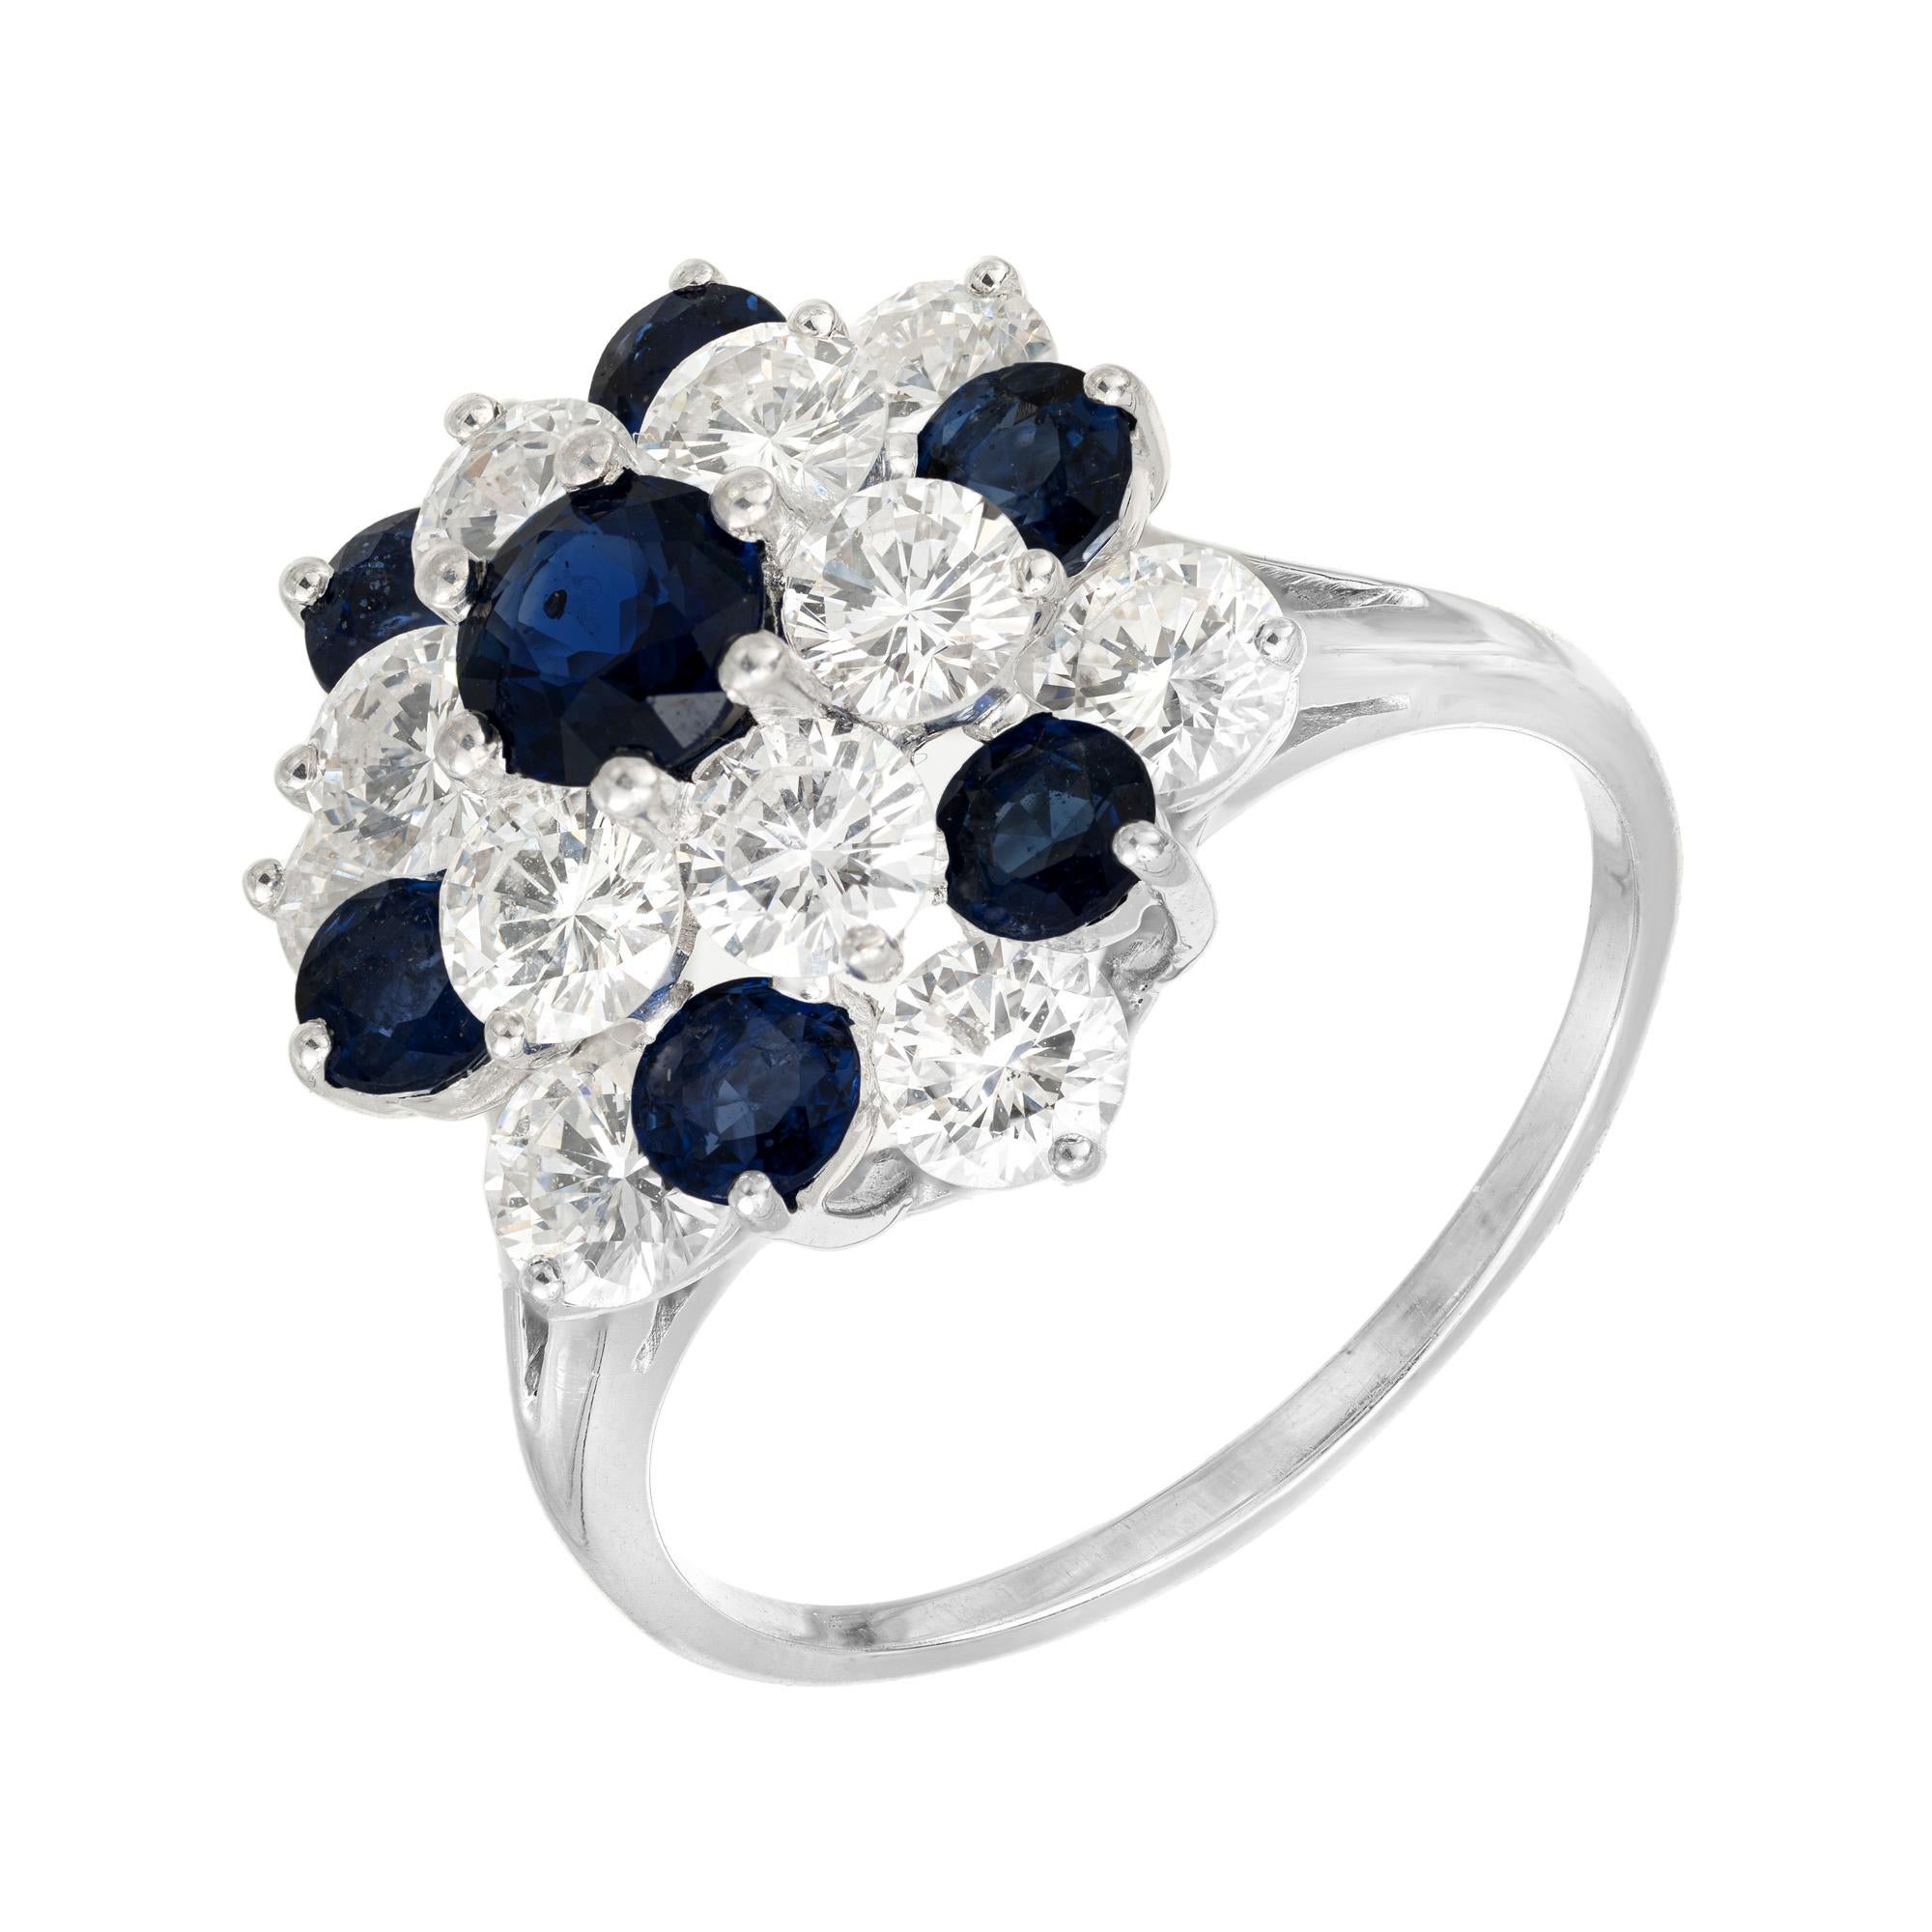 1980's deep blue sapphire and diamond raised cluster ring. This ring is boasts a cluster of 7 round cut blue sapphires with a total approximate weight of 7.00crts, that are accented by 12 round brilliant cut diamonds with an approximate carat weight